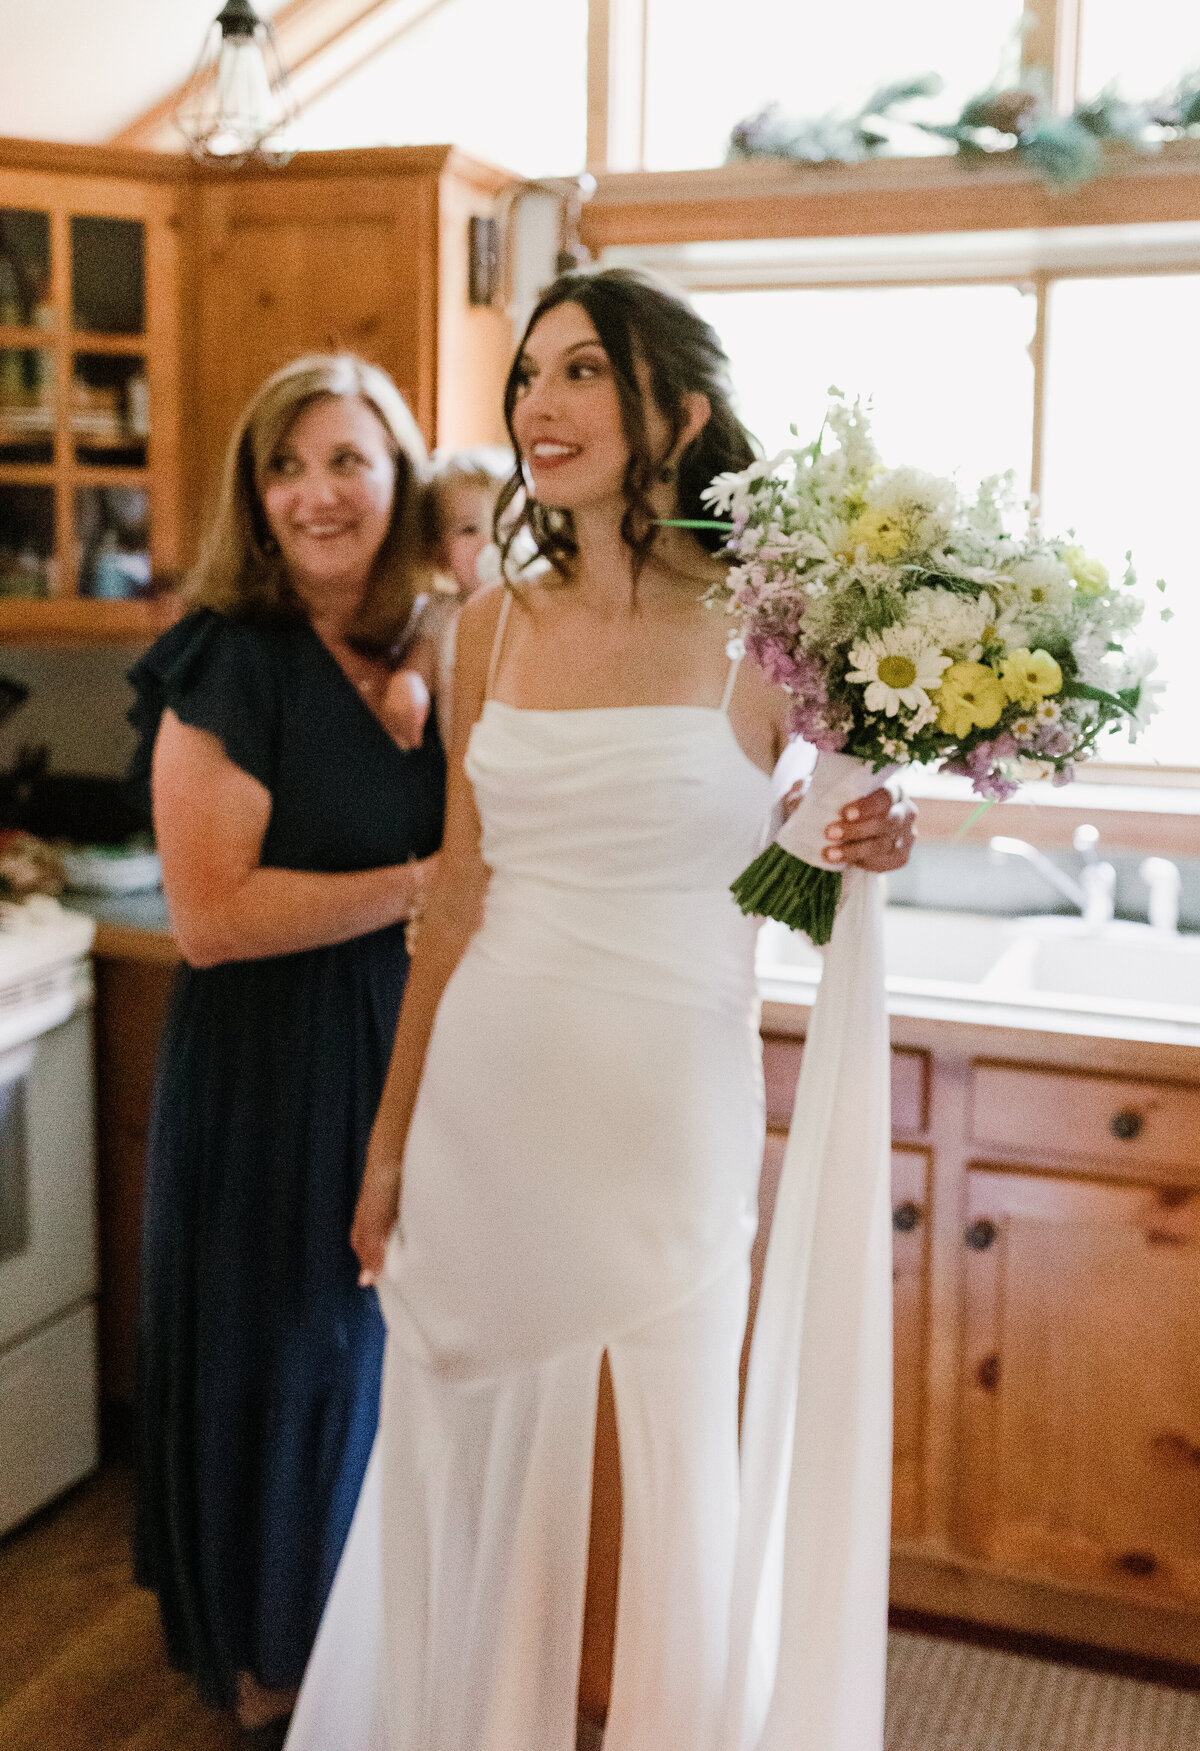 Bride in kitchen with family members